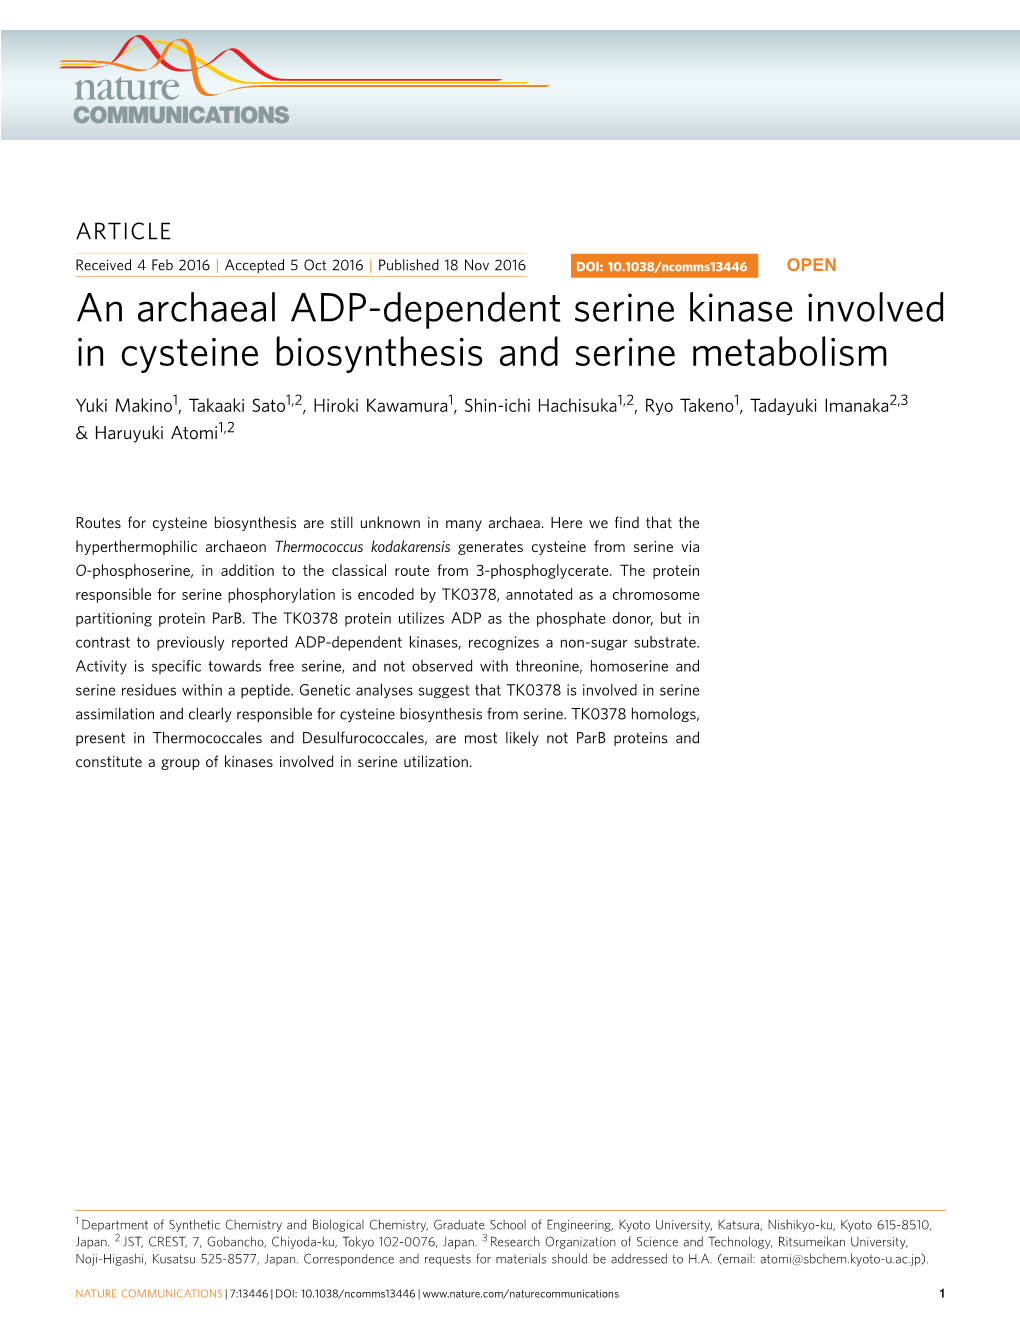 An Archaeal ADP-Dependent Serine Kinase Involved in Cysteine Biosynthesis and Serine Metabolism